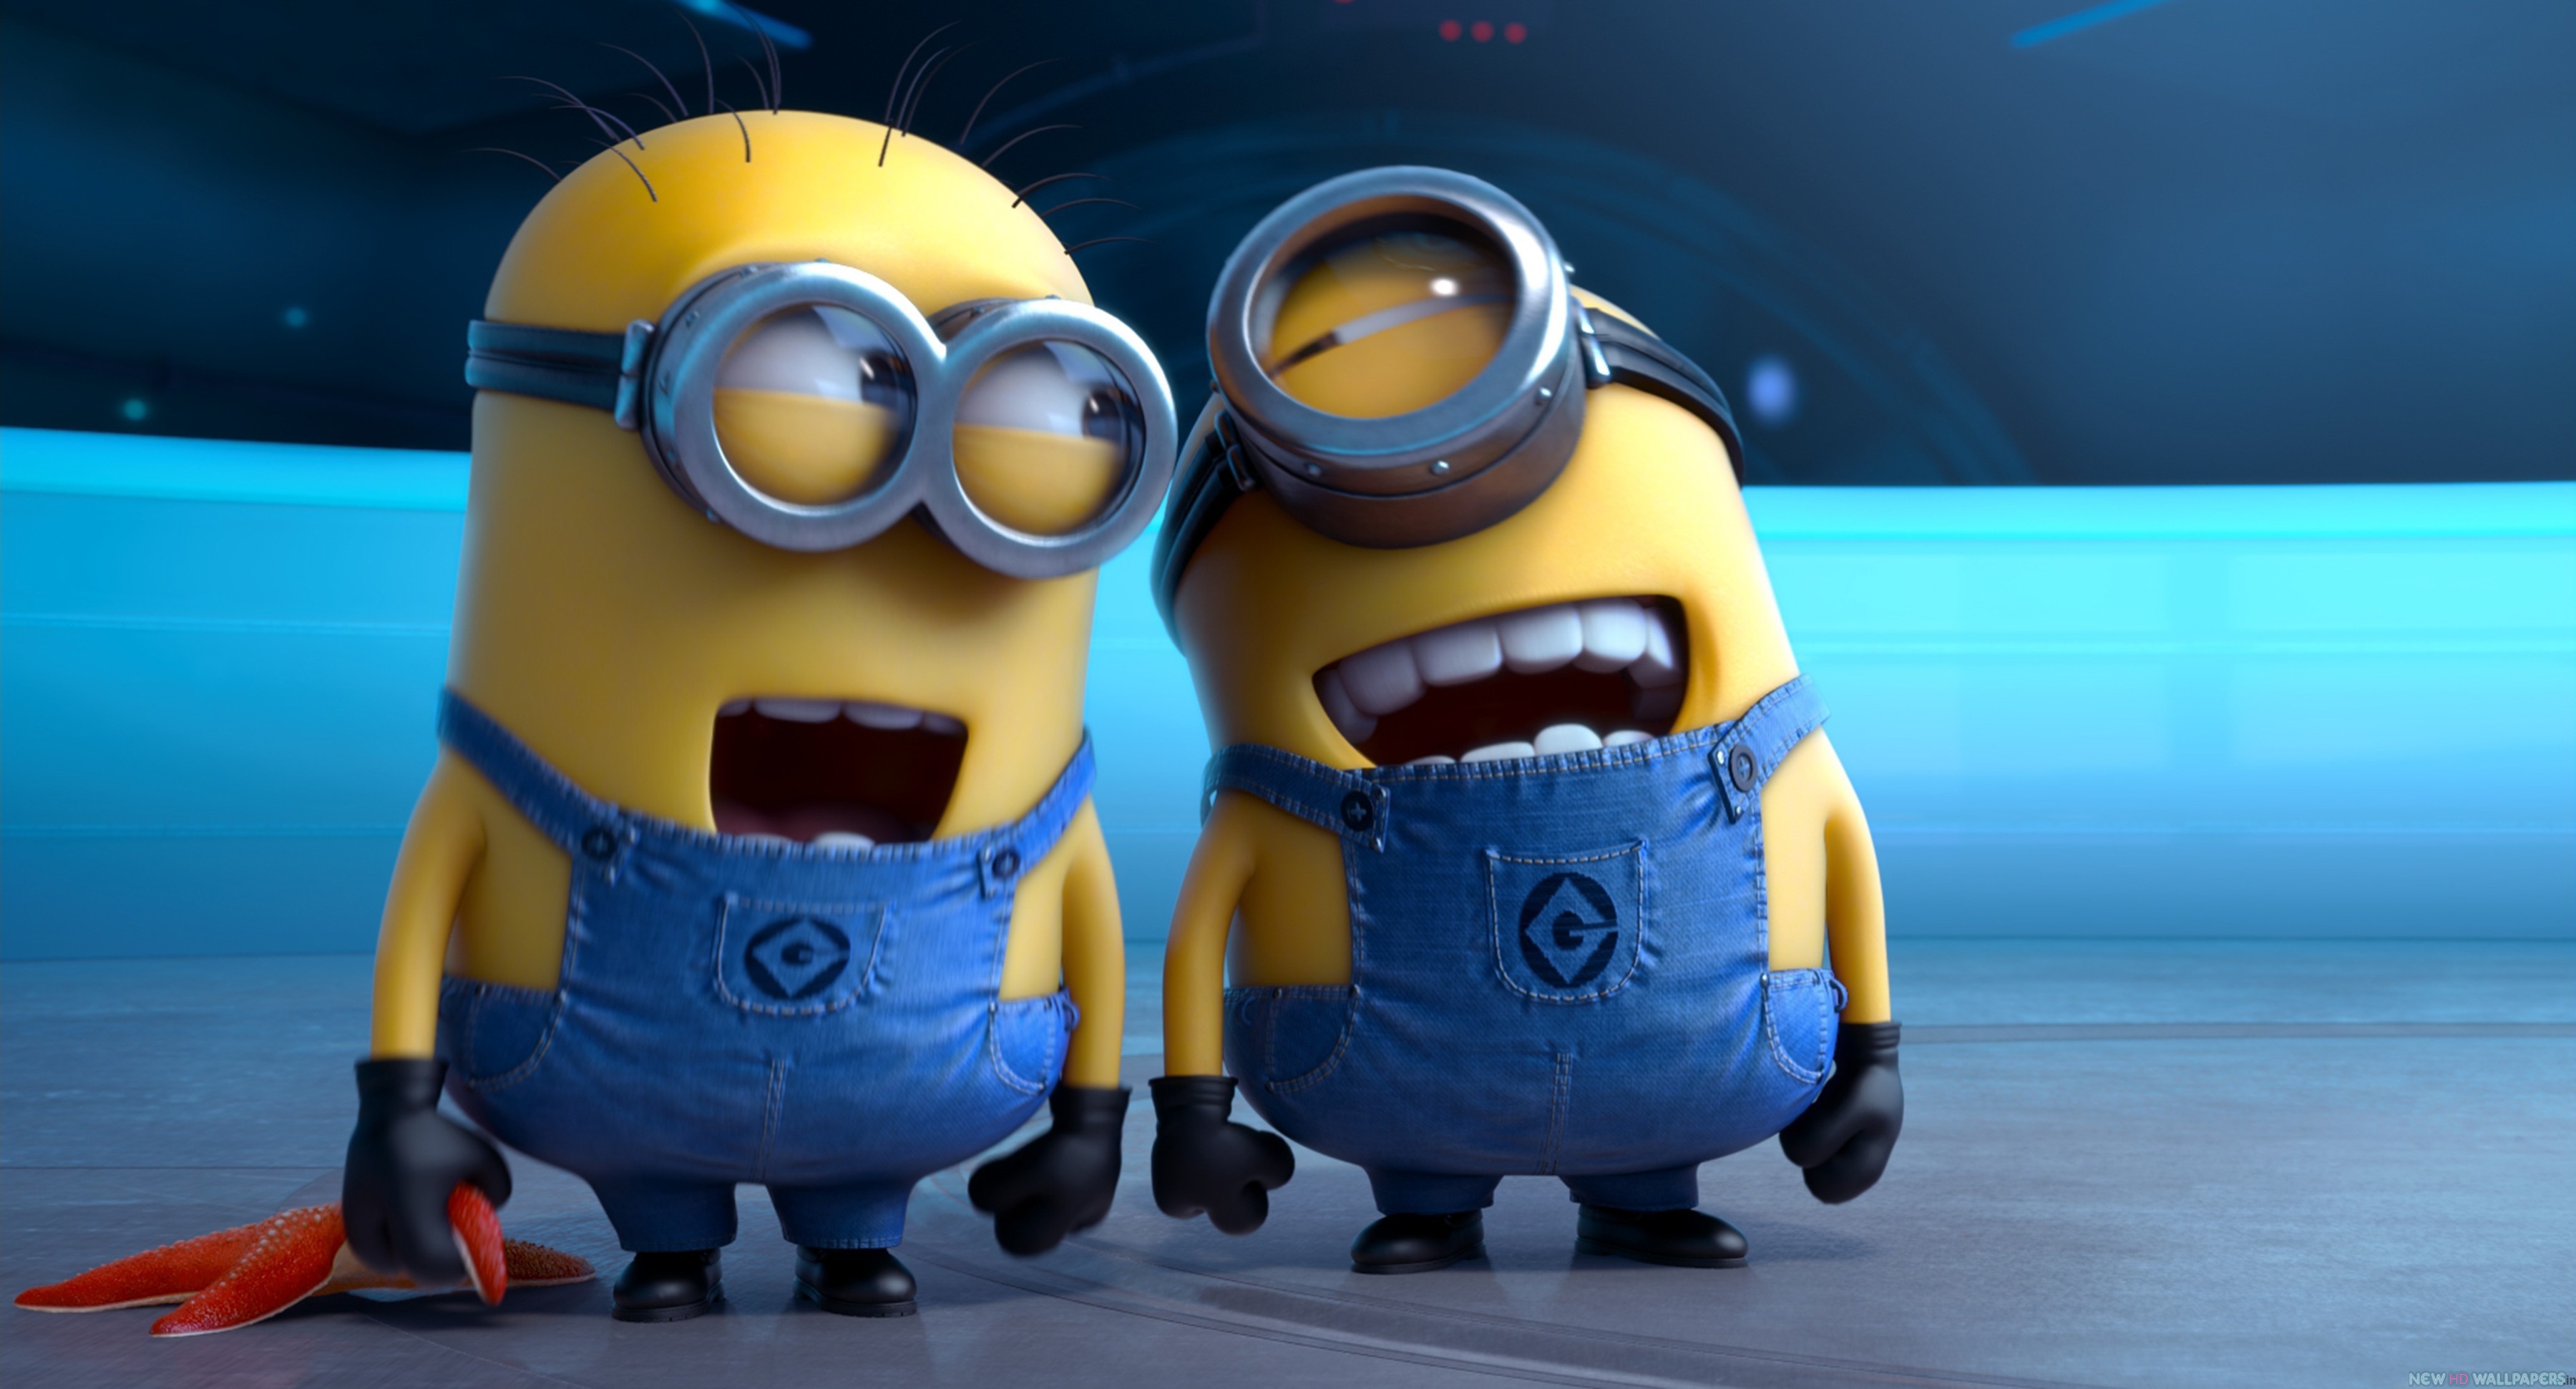 Cartoons_The_cartoon_Minions_two_of_minions_are_laughing_051629_.jpg (3600×1941)